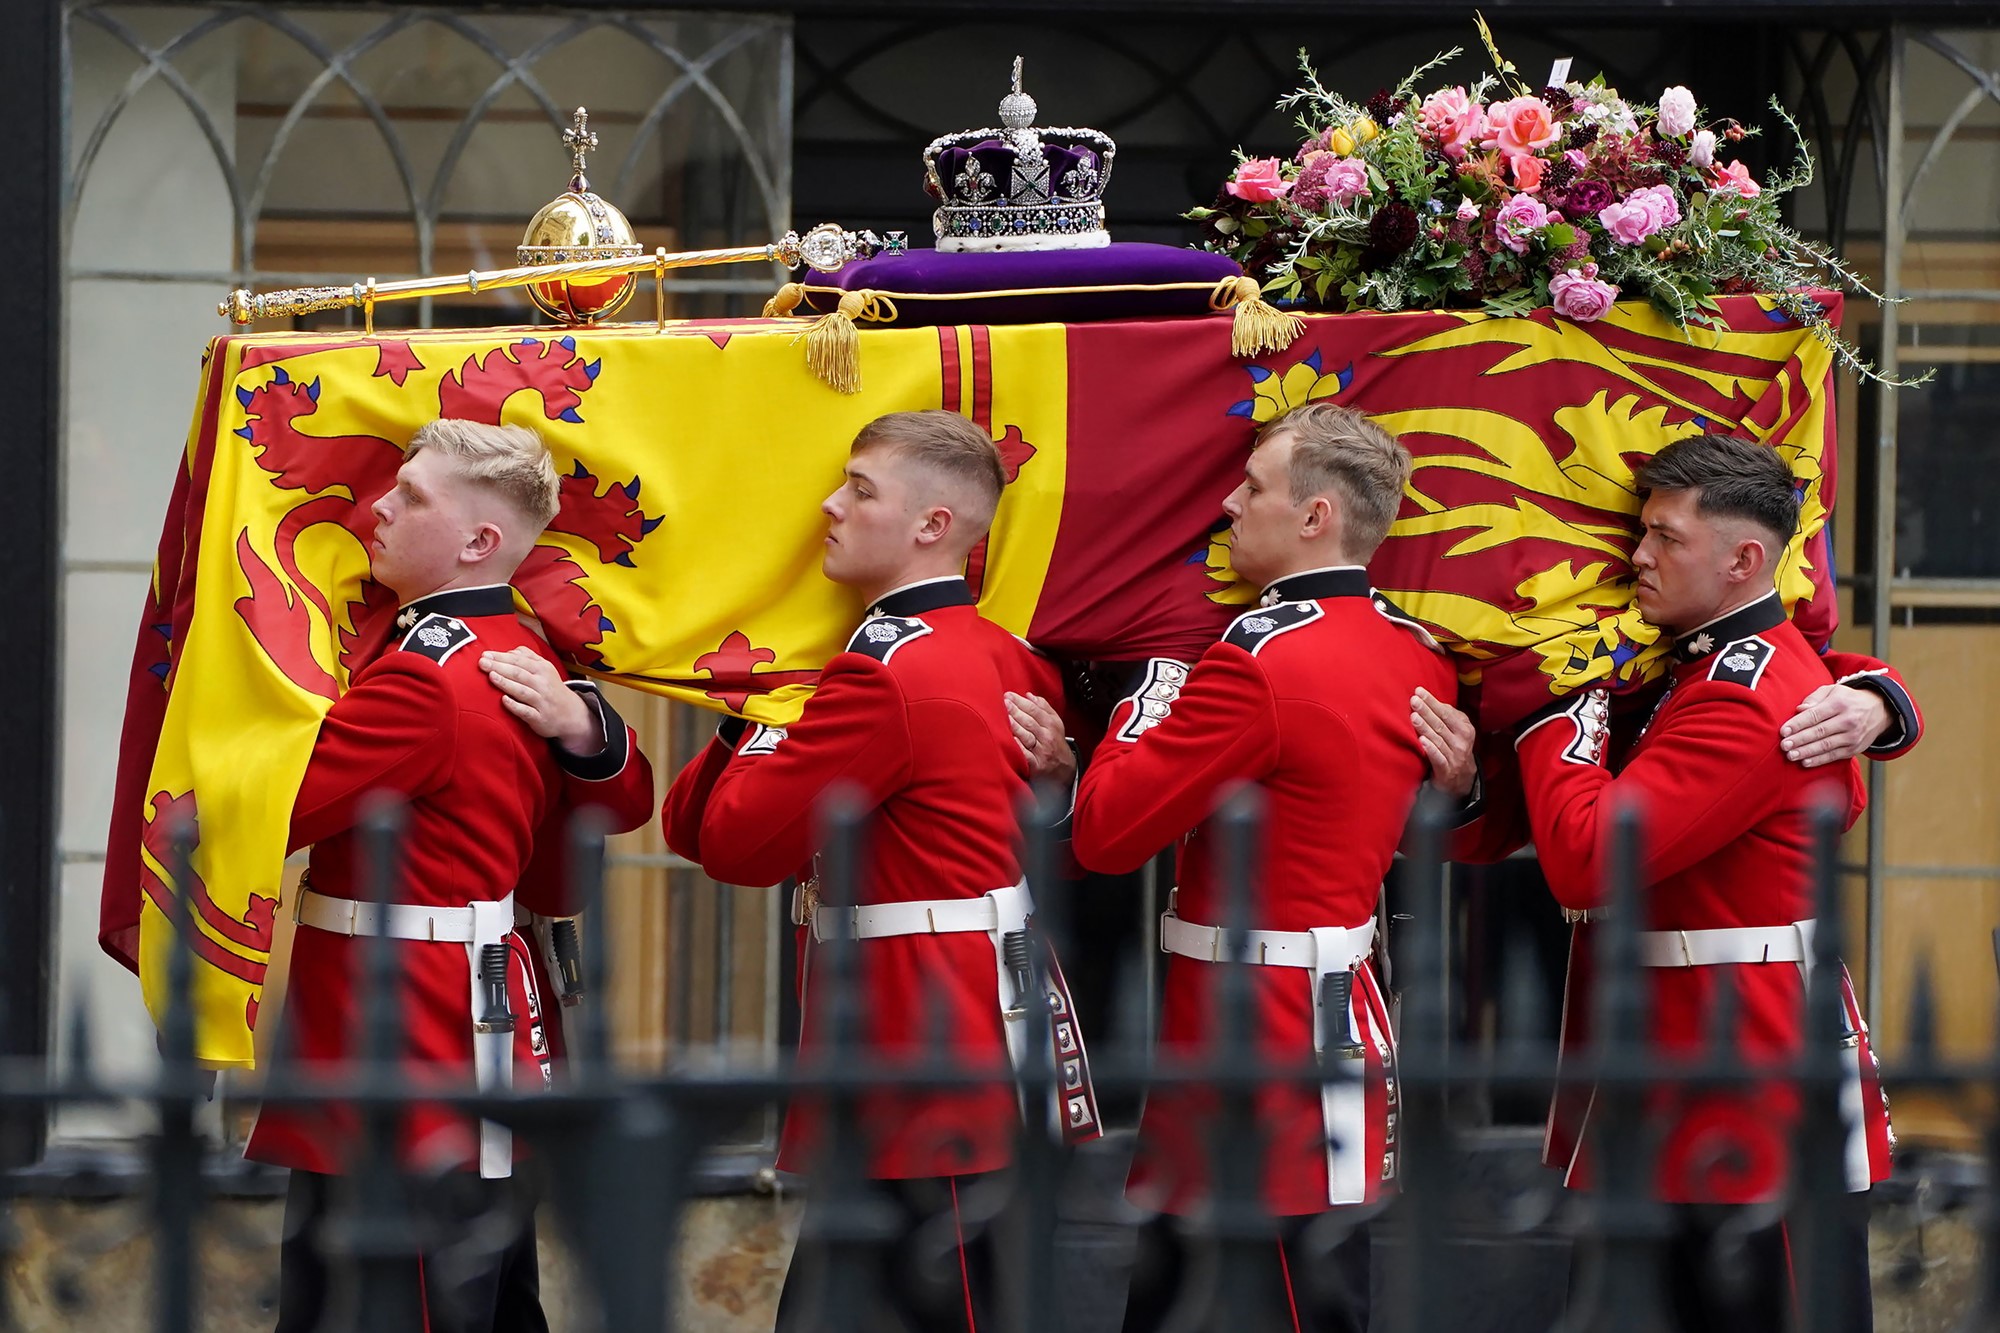 Four pall bearers carry the Queen's coffin